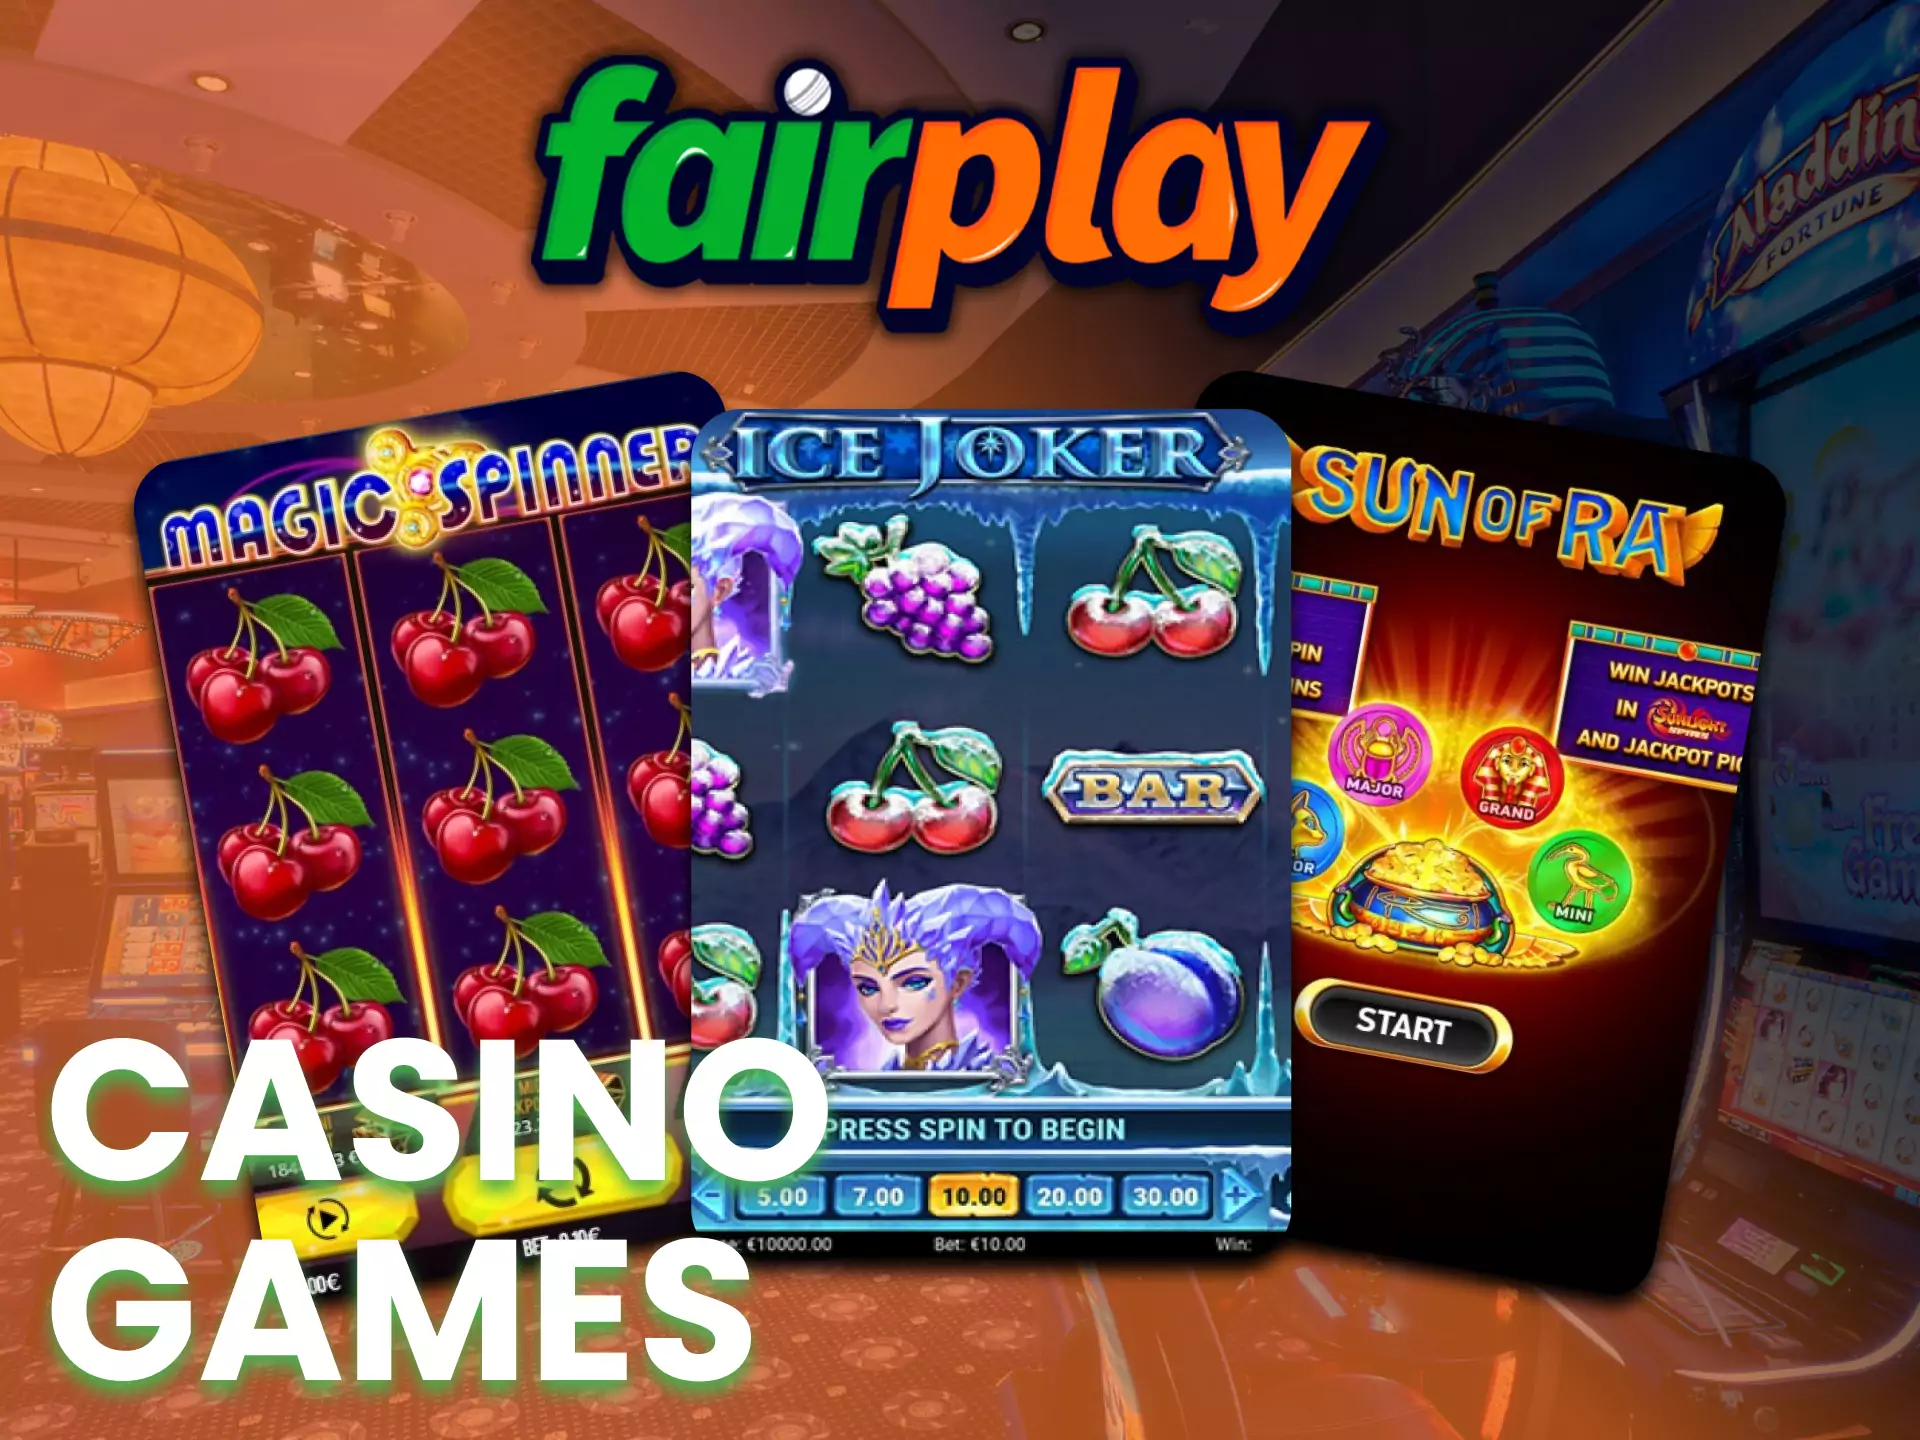 On Fairplay, find your favorite game and enjoy it.